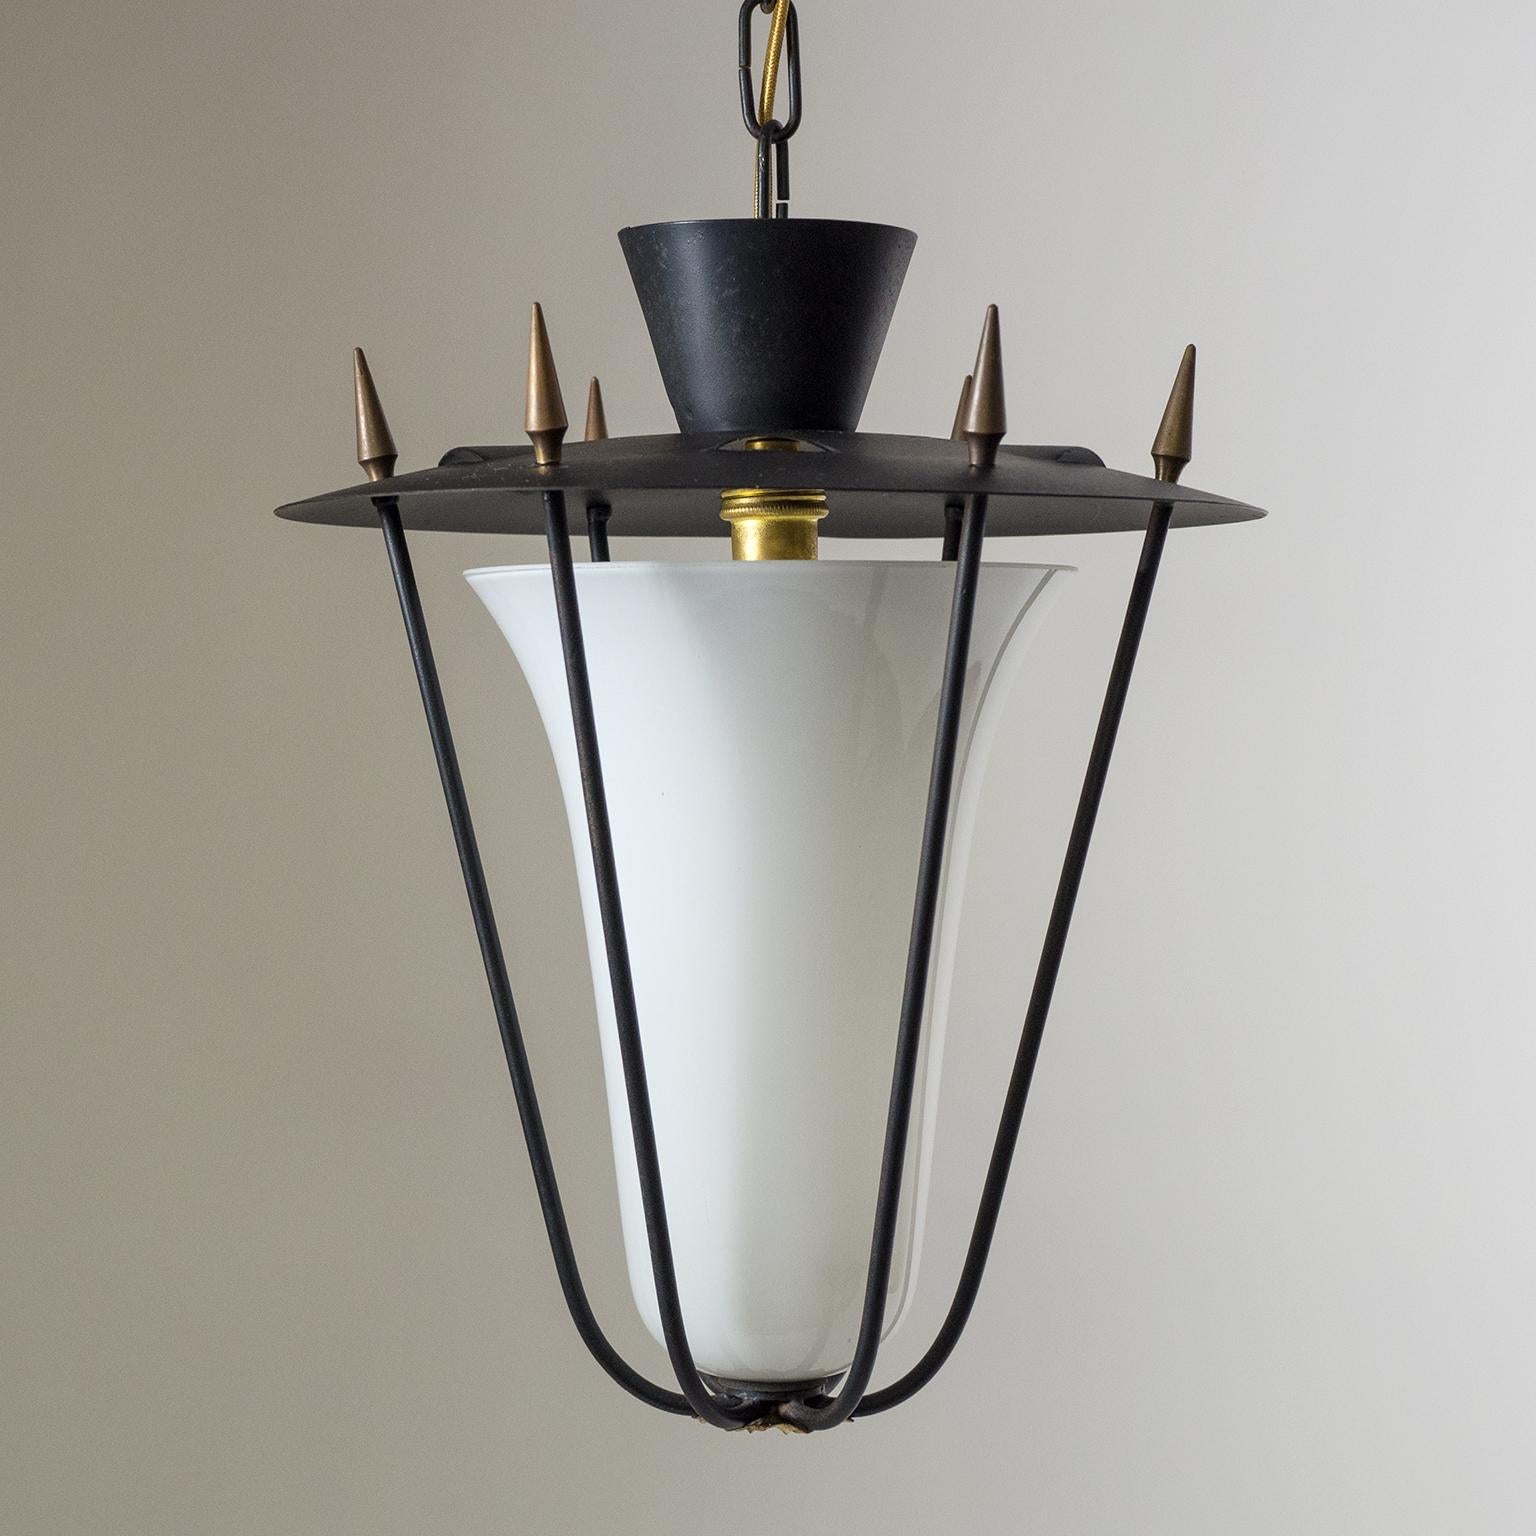 1950s French Lantern, Black and White with Brass Details 7